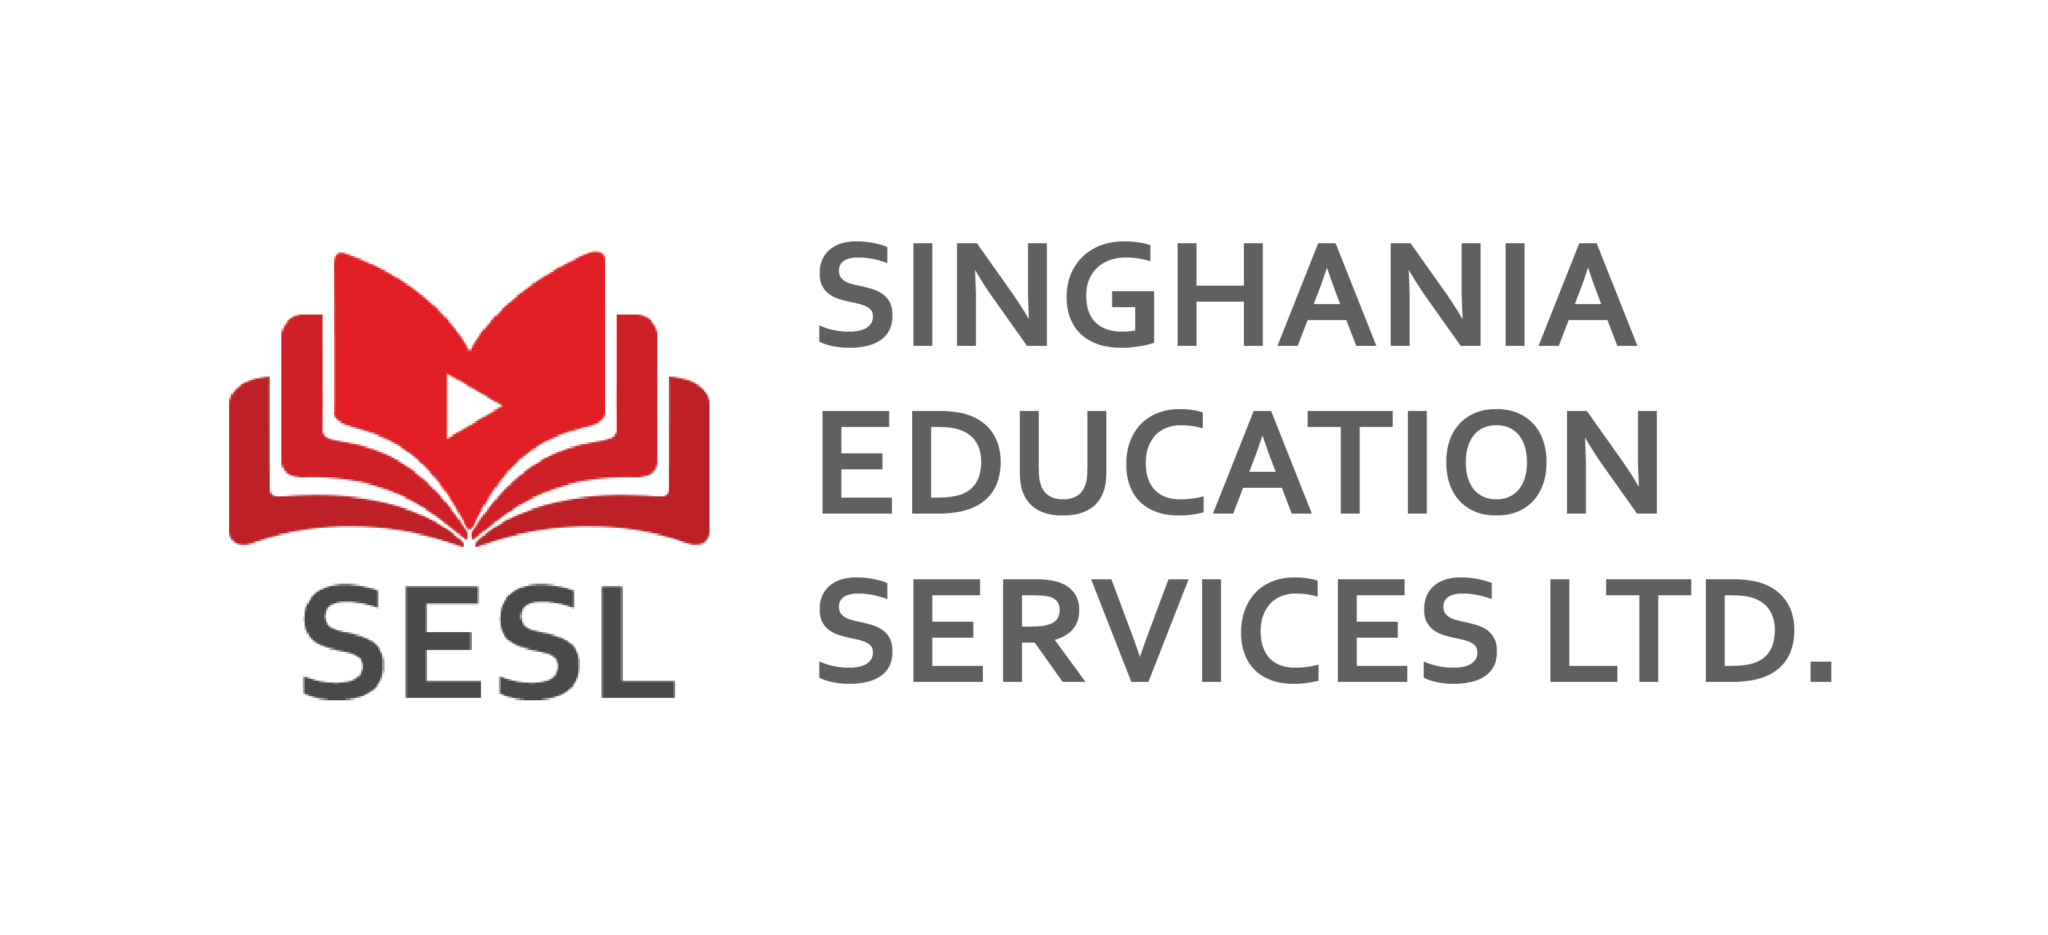 Singhania Education Services Limited